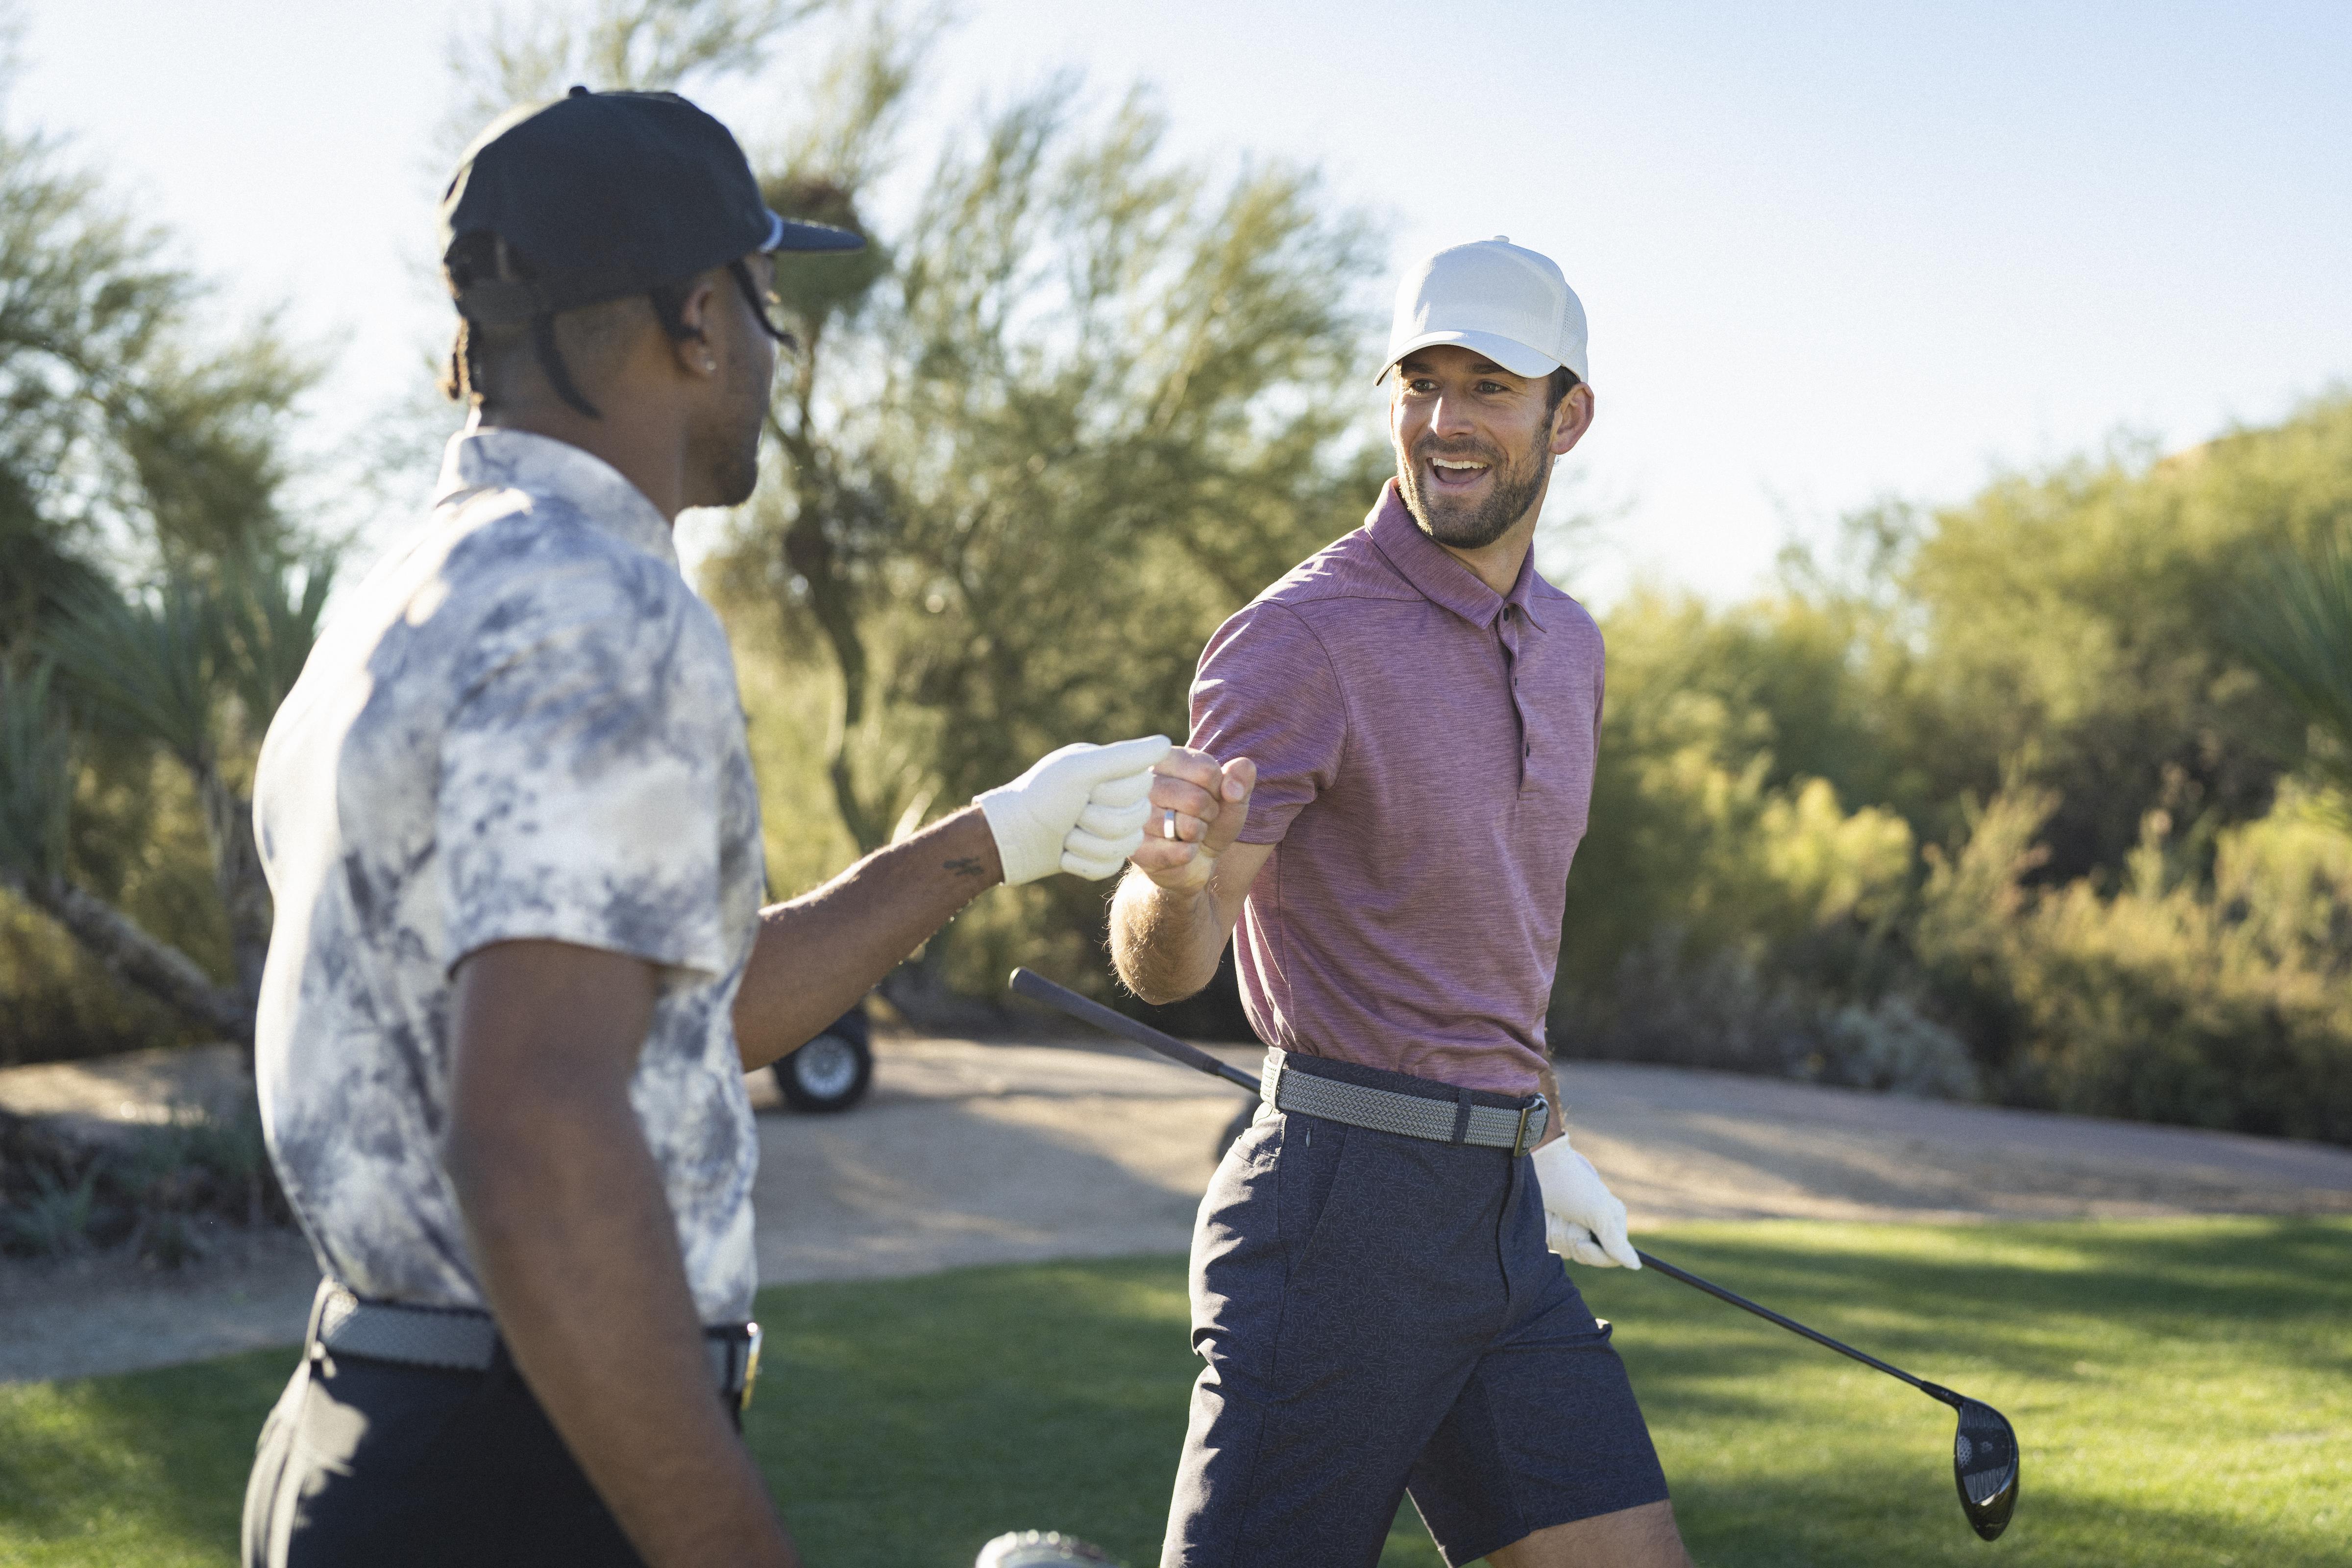 A look at the newest men's golf apparel line from Dick's Sporting